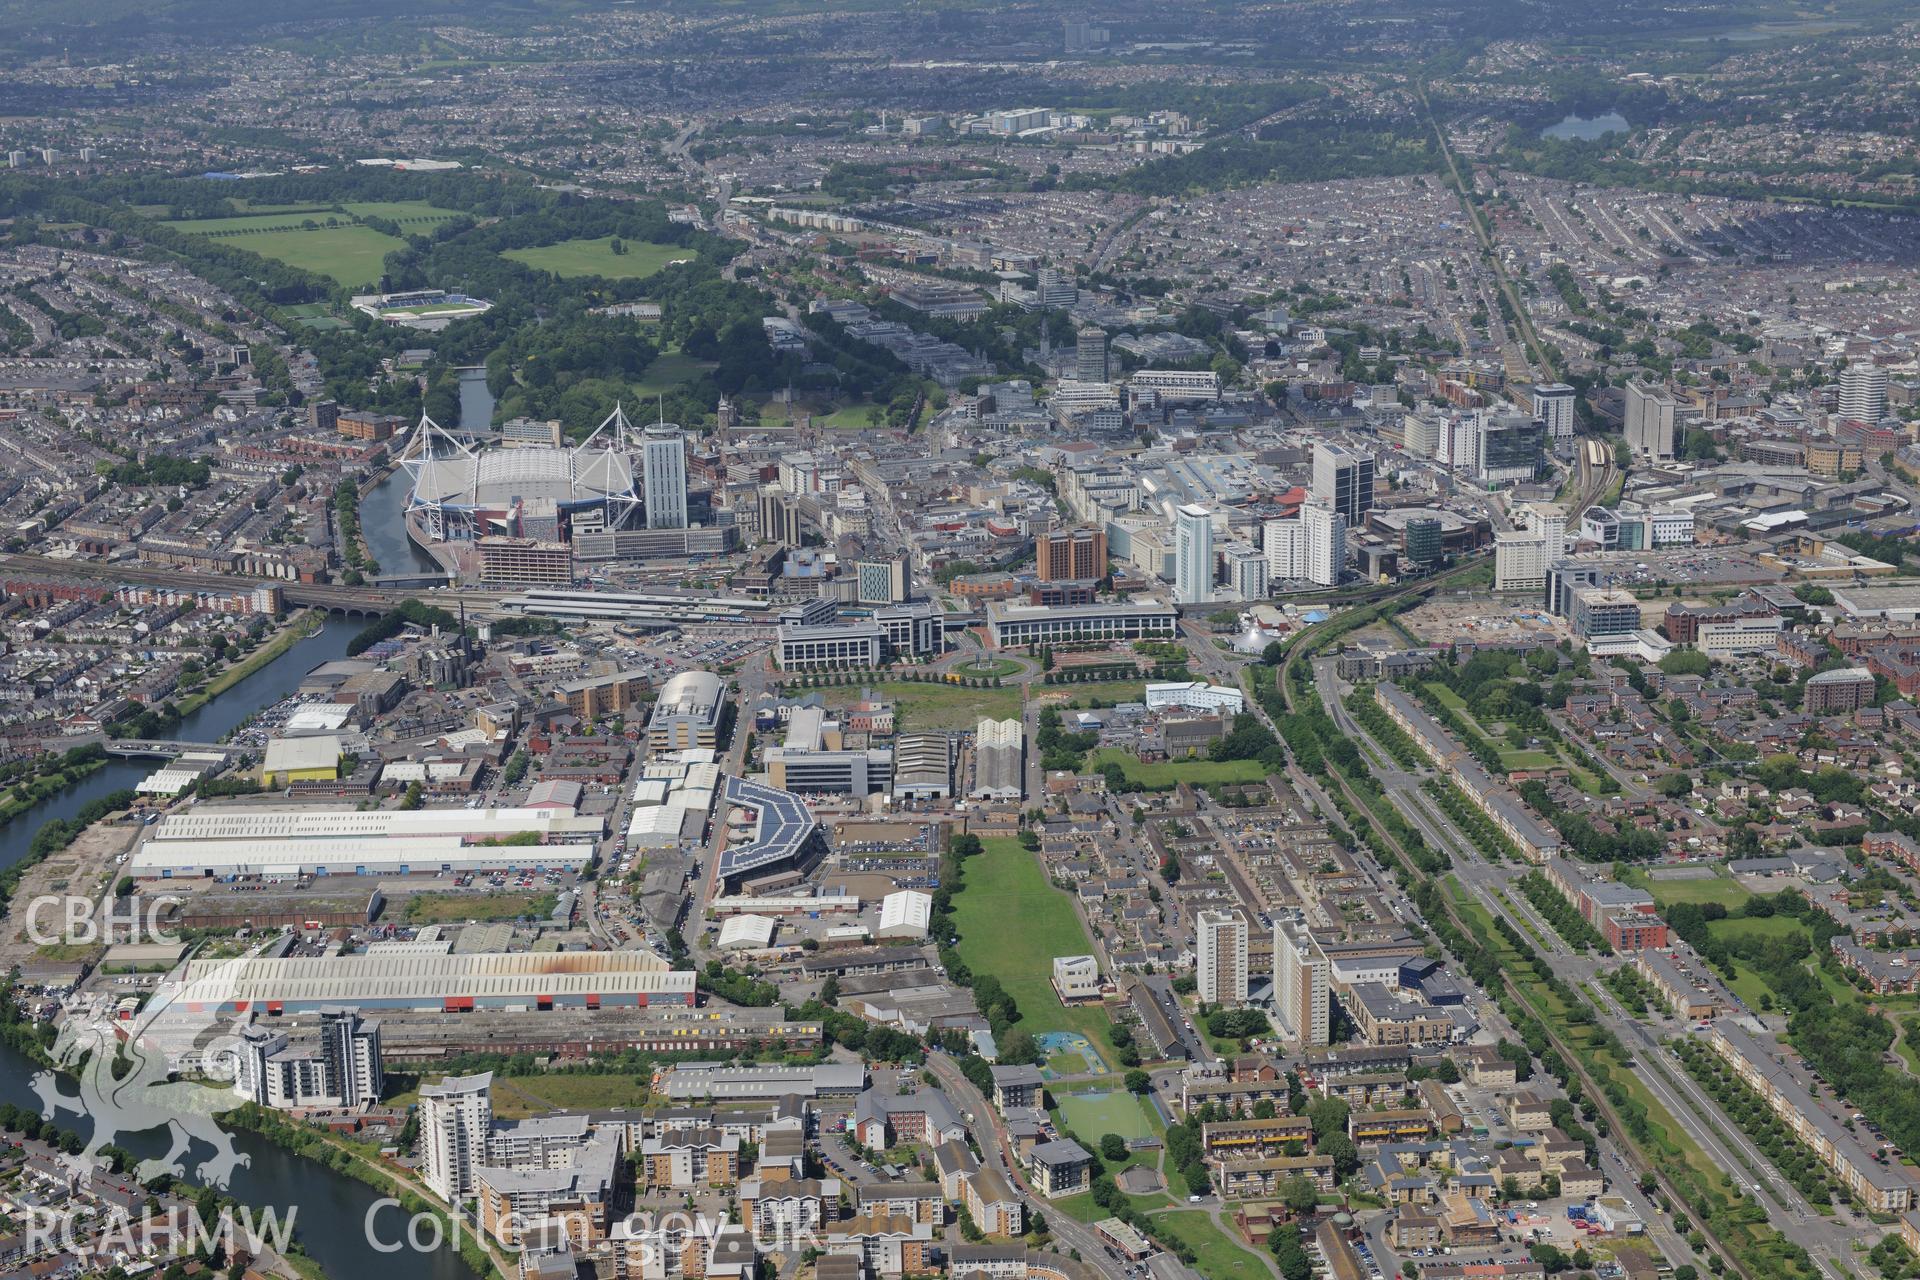 Pontcanna Fields; Sophia Gardens Cricket Ground; the Millennium Stadium; Central Railway Station and Cardiff and Vale College City Centre Campus, Cardiff. Oblique aerial photograph taken during the Royal Commission's programme of archaeological aerial reconnaissance by Toby Driver on 29th June 2015.